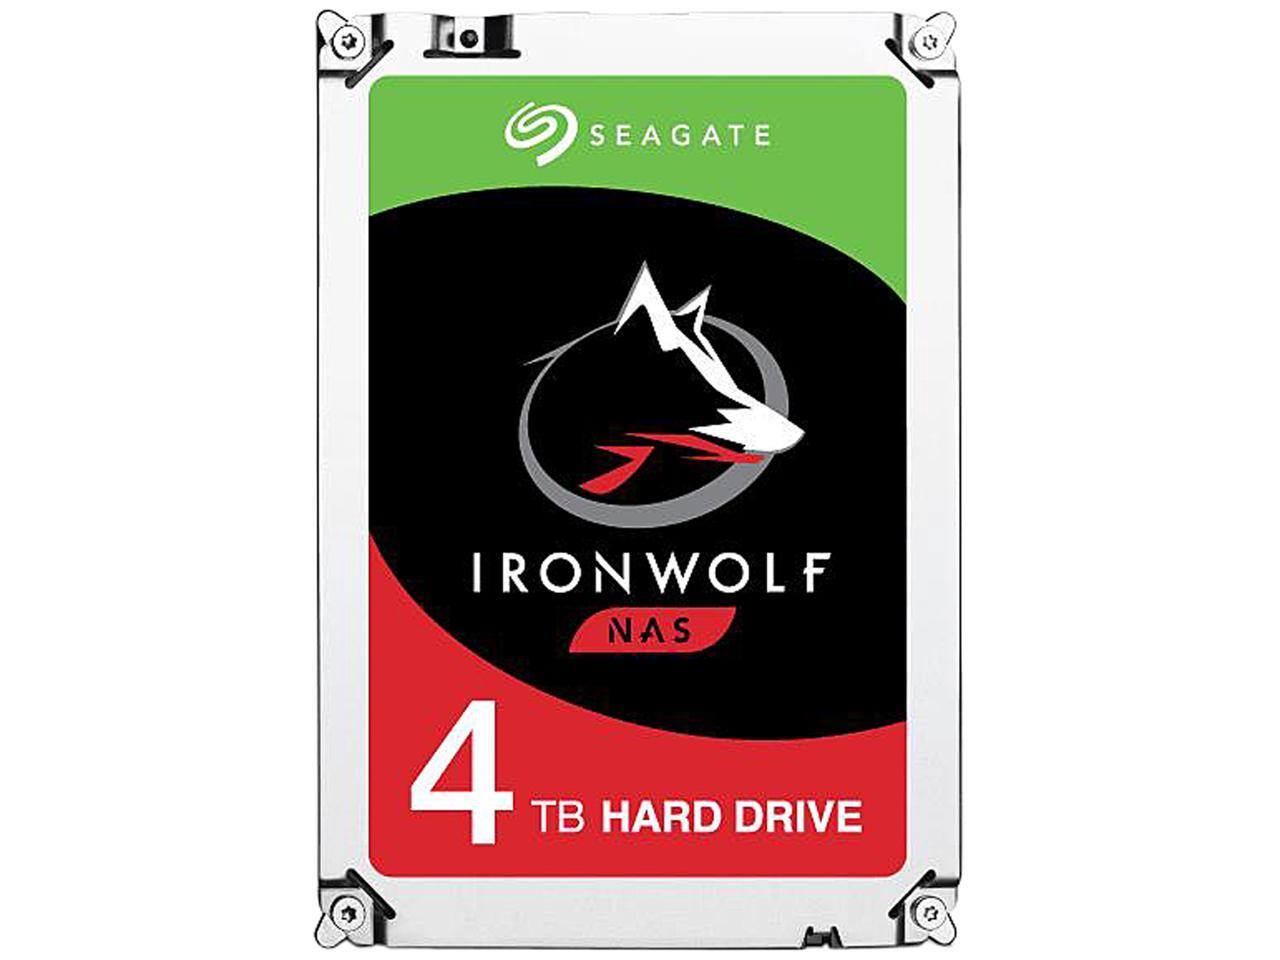 Seagate IronWolf 4TB NAS Hard Drive for $94.99 w/ FS